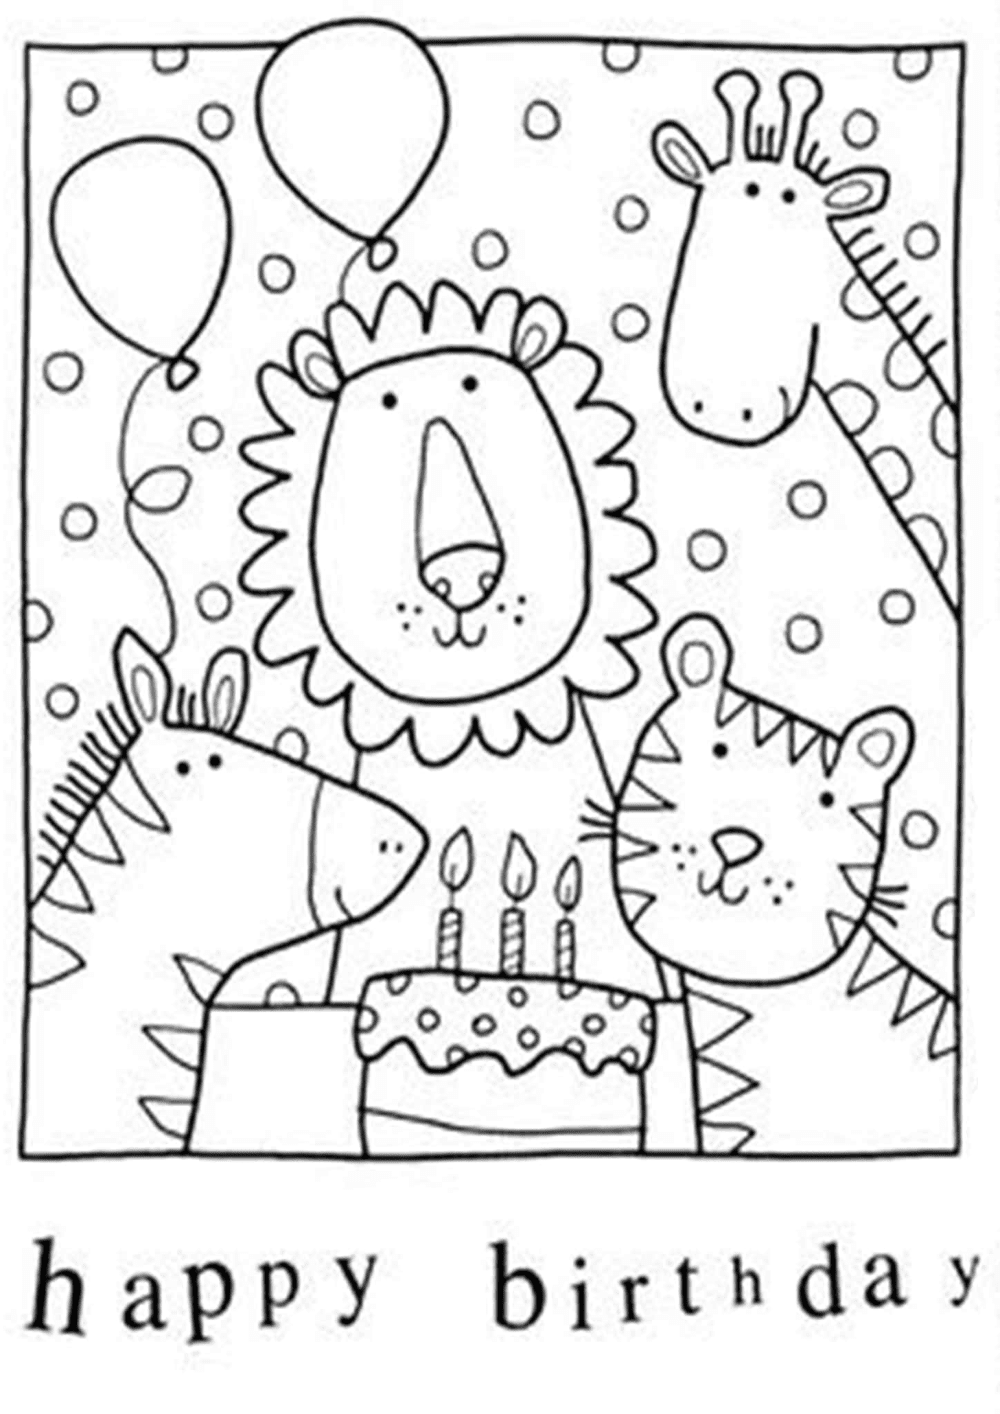 Free & Easy To Print Happy Birthday Coloring Pages